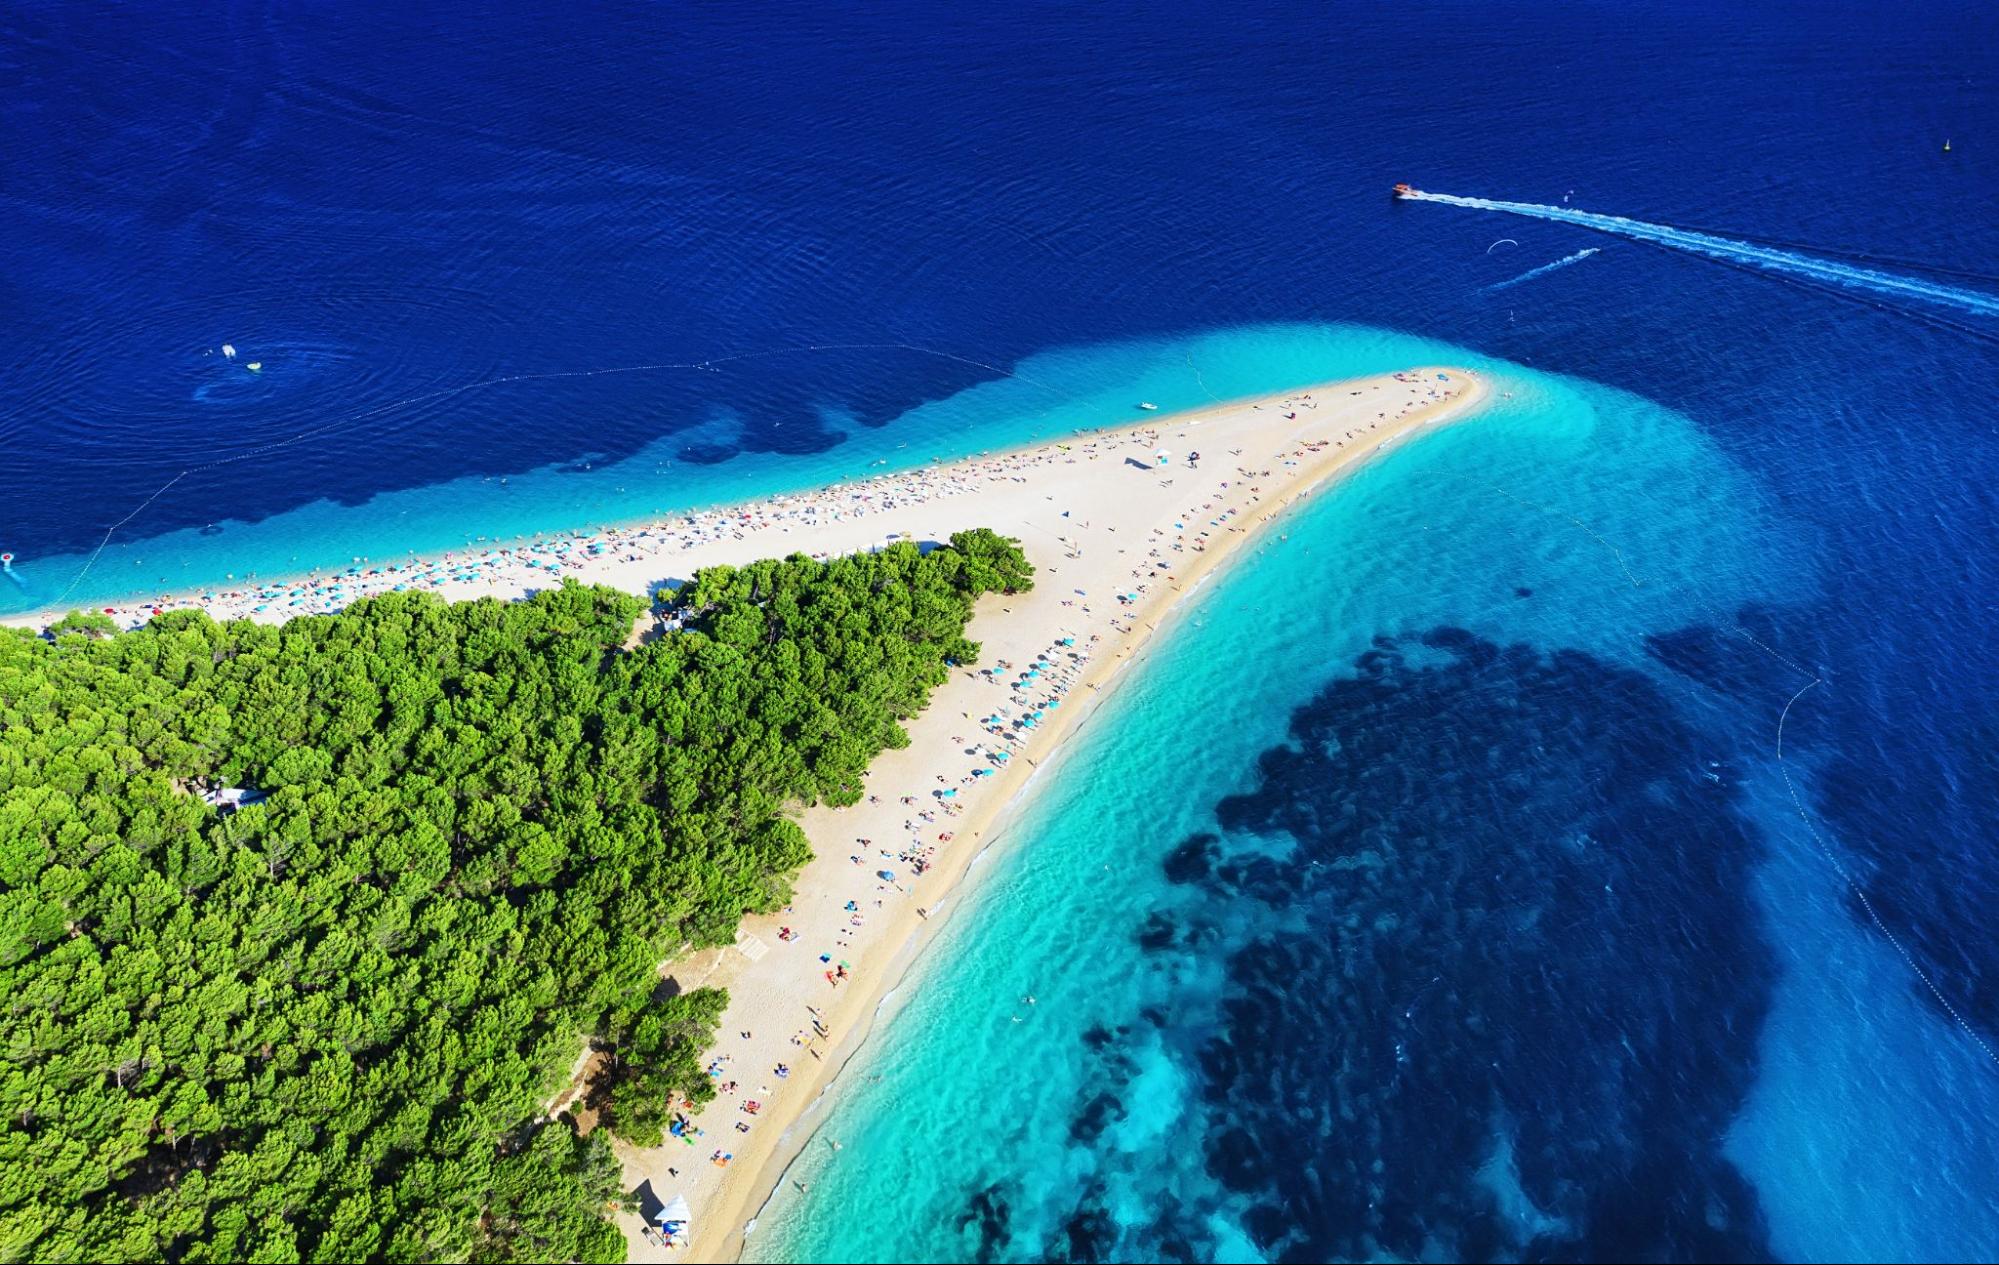 Aerial view of a narrow sandy beach stretching into the sea with dense green foliage on one side and clear blue water on the other. A speedboat, possibly part of Dubrovnik's private boat tours, creates a wake in the dark blue sea.